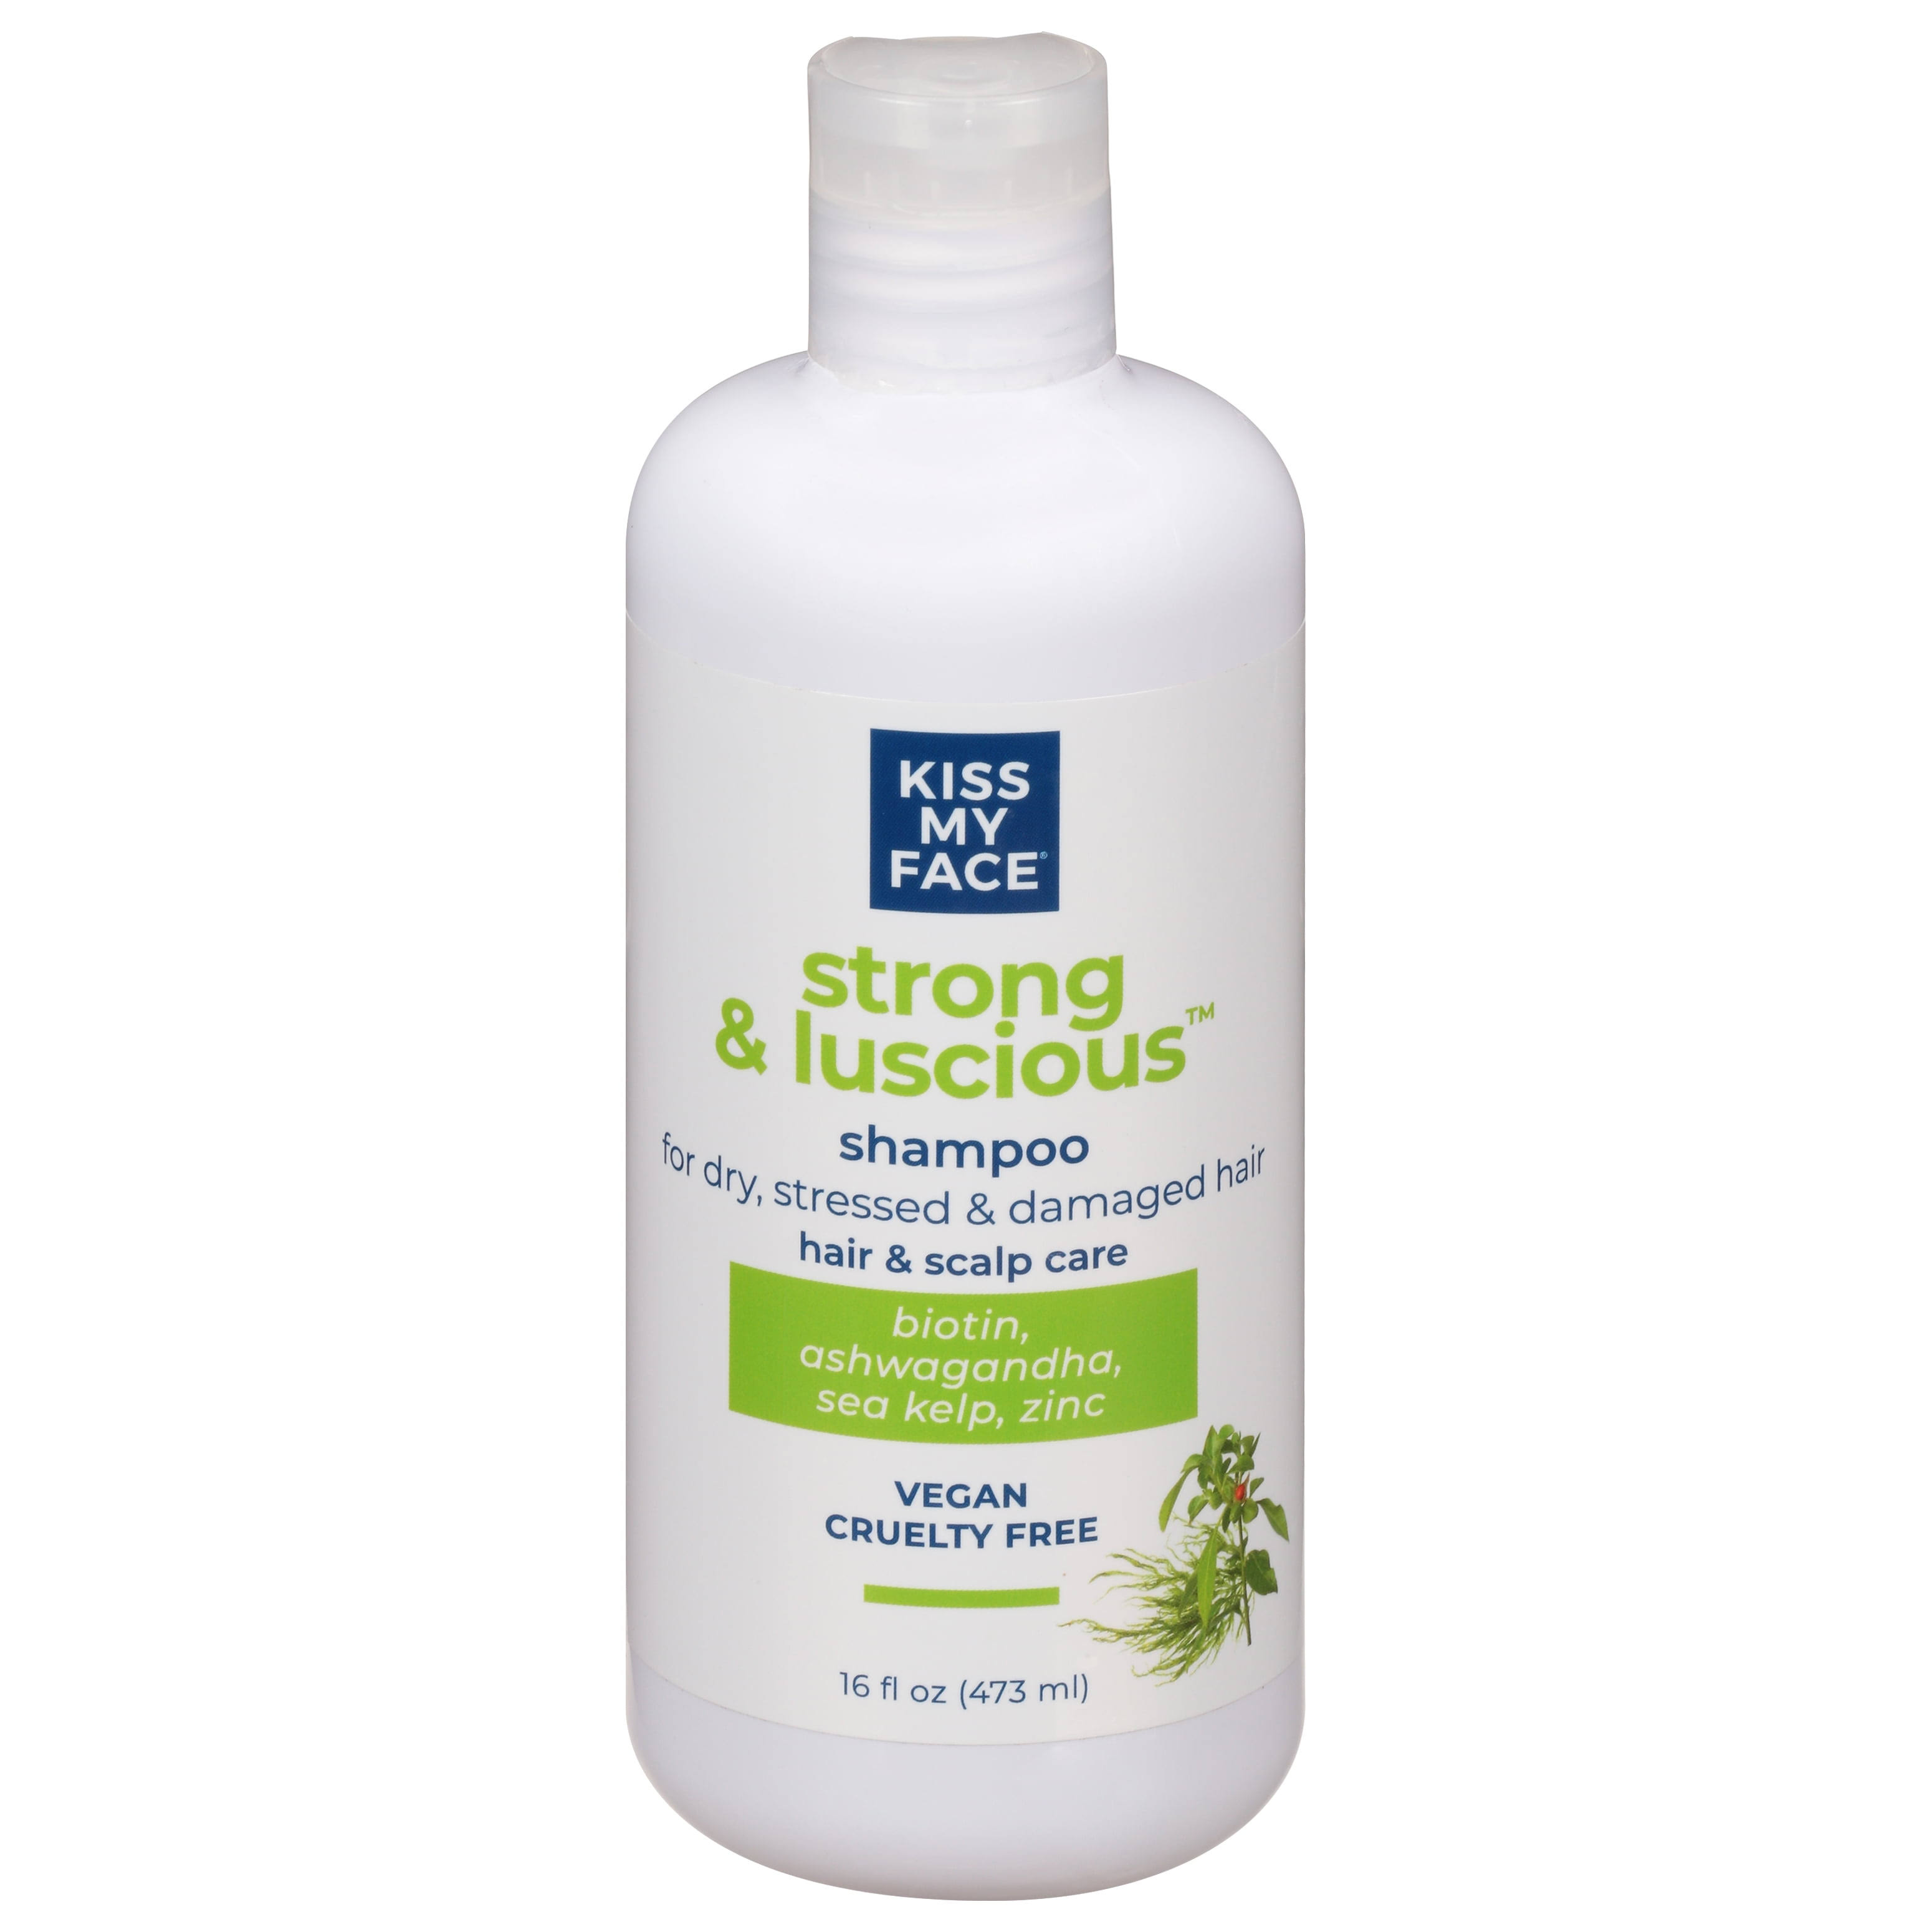 Kiss My Face Luscious Strong Shampoo 12 oz by Shampoos & Conditioners